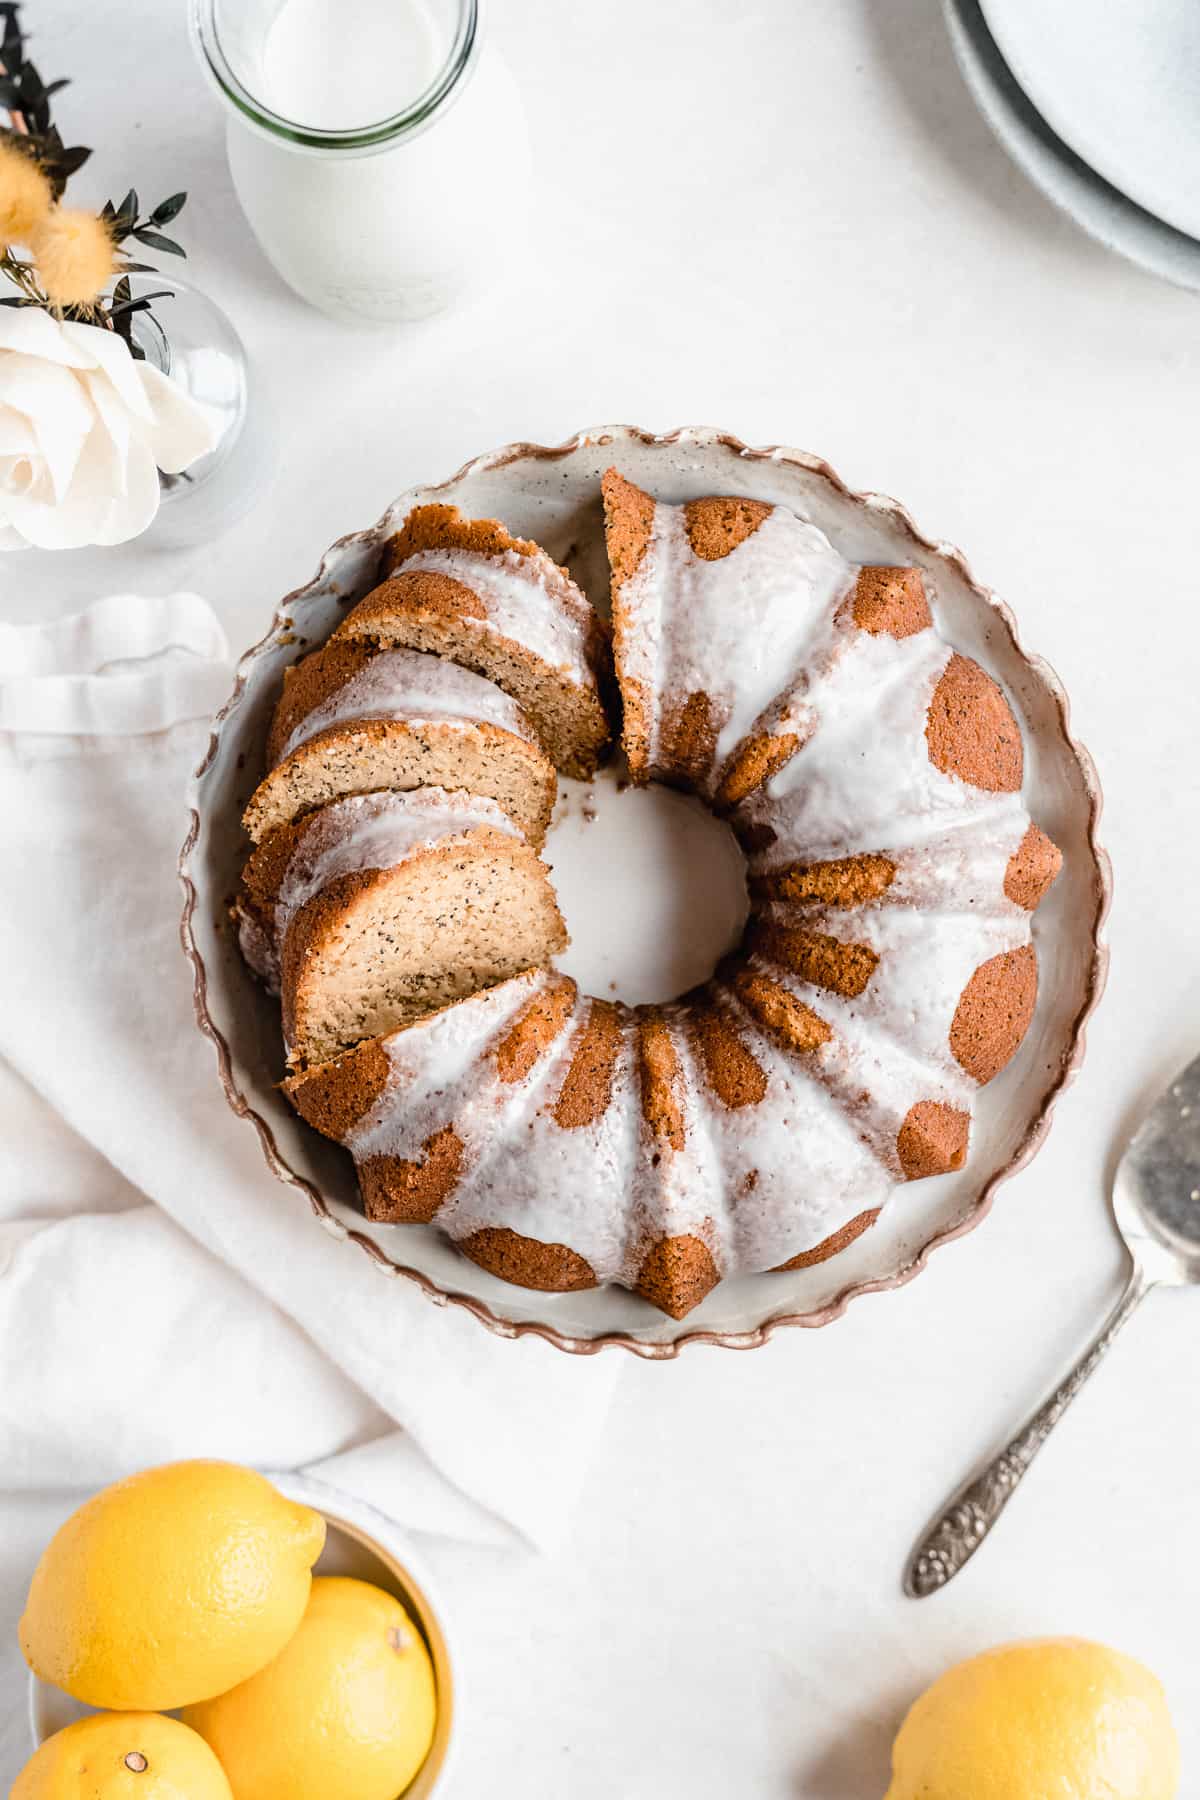 Overhead photo of the freshly baked and iced Citrus-y Gluten Free Lemon Poppy Seed Bundt Cake sitting on a cake plate with scalloped edges.  Several slices have been cut.  A silver cake server is laying nearby.  A bowl of lemons and carafe of milk can be seen in the background.  